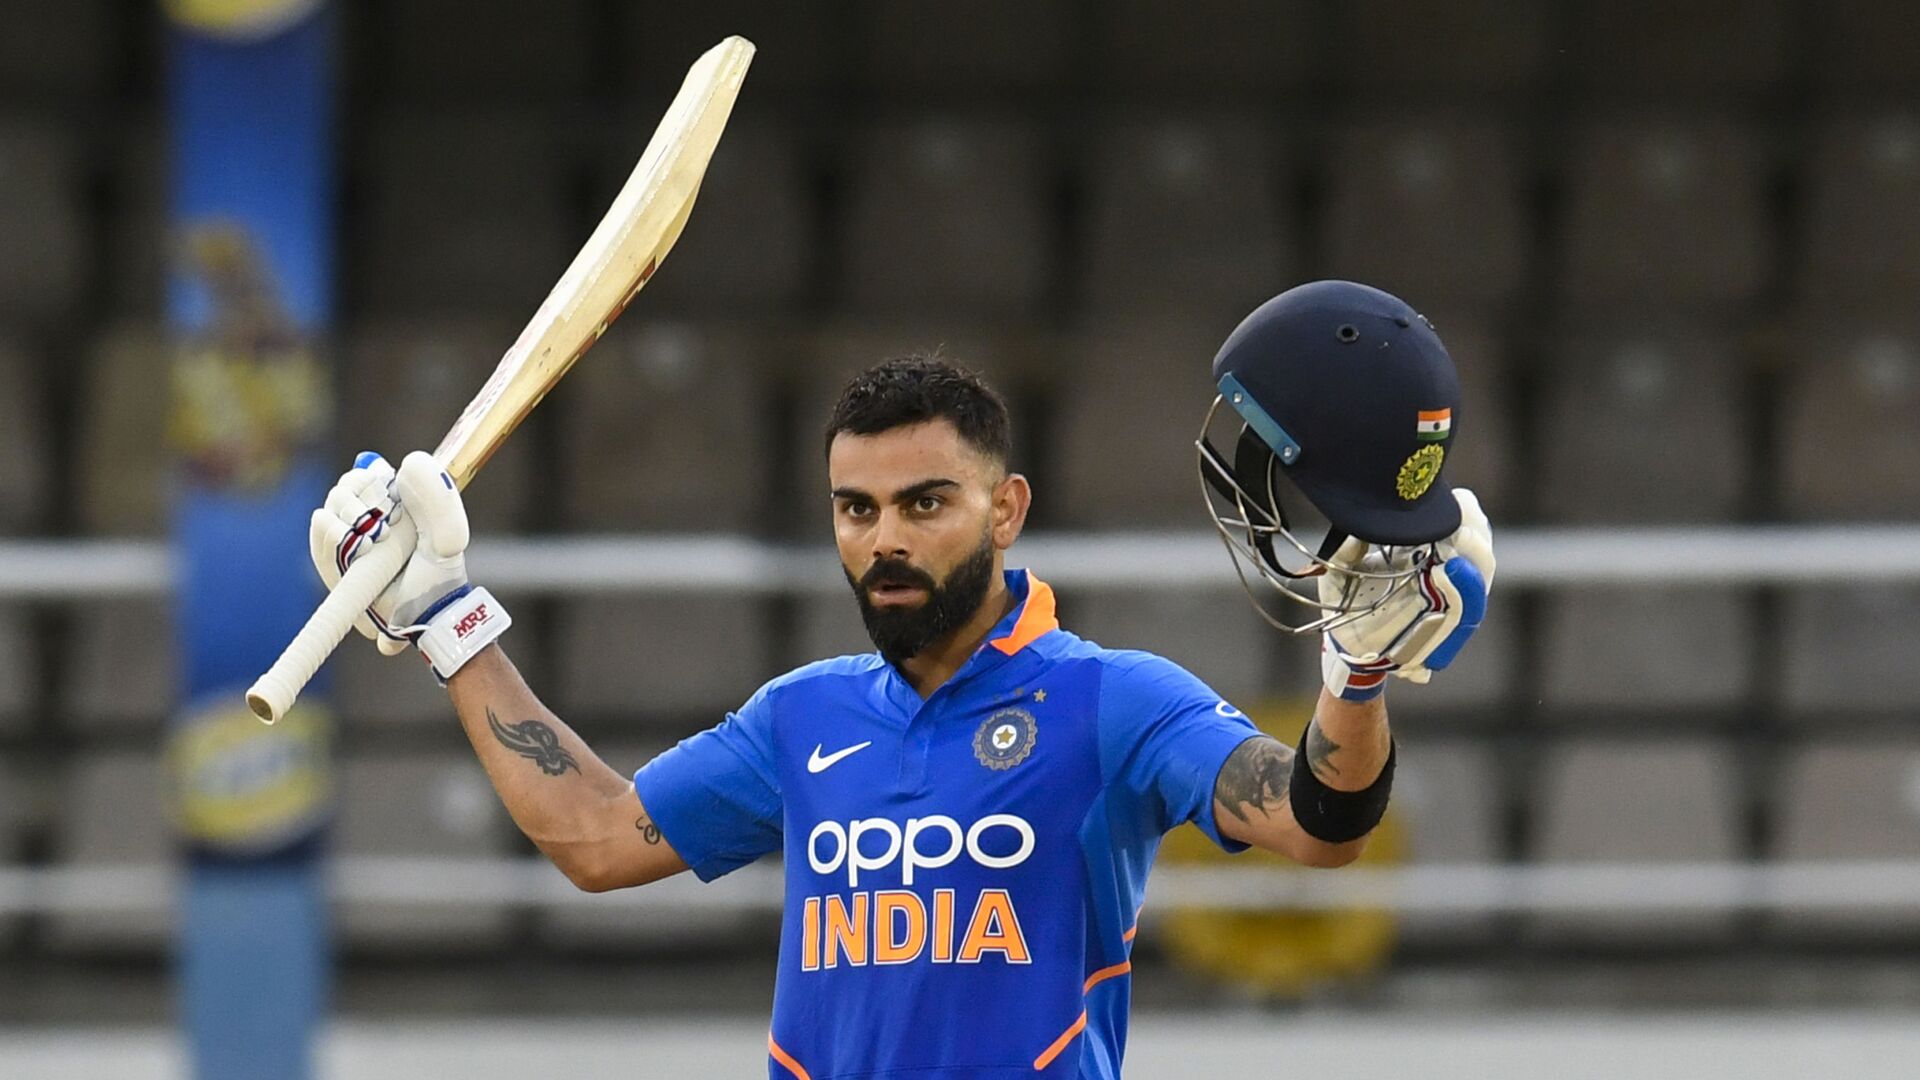 Virat Kohli of India celebrates his century during the 3rd ODI match between West Indies and India at Queens Park Oval, Port of Spain, Trinidad and Tobago, on August 14, 2019 - Sputnik International, 1920, 12.05.2022